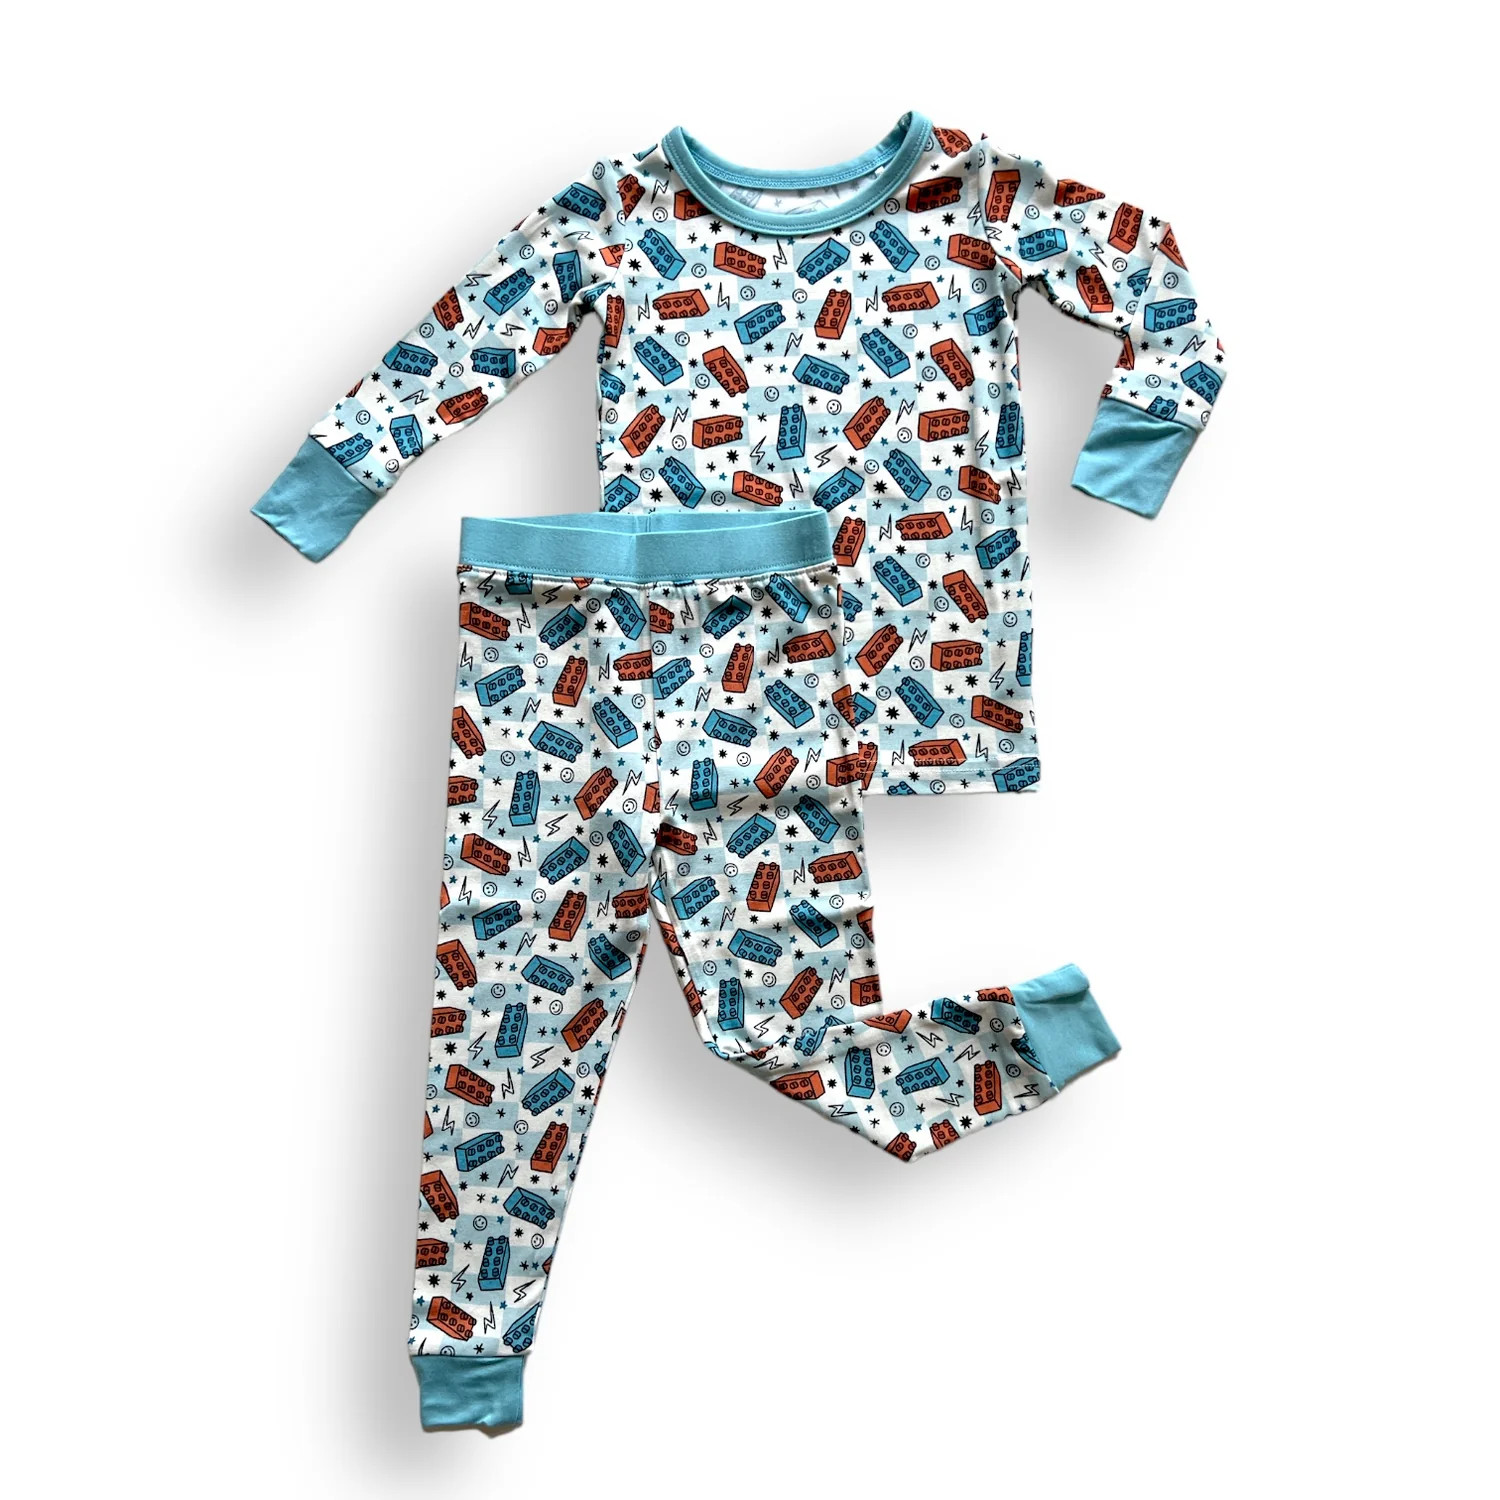 LONG SLEEVE 2 PIECE SETS- Legos | millie + roo